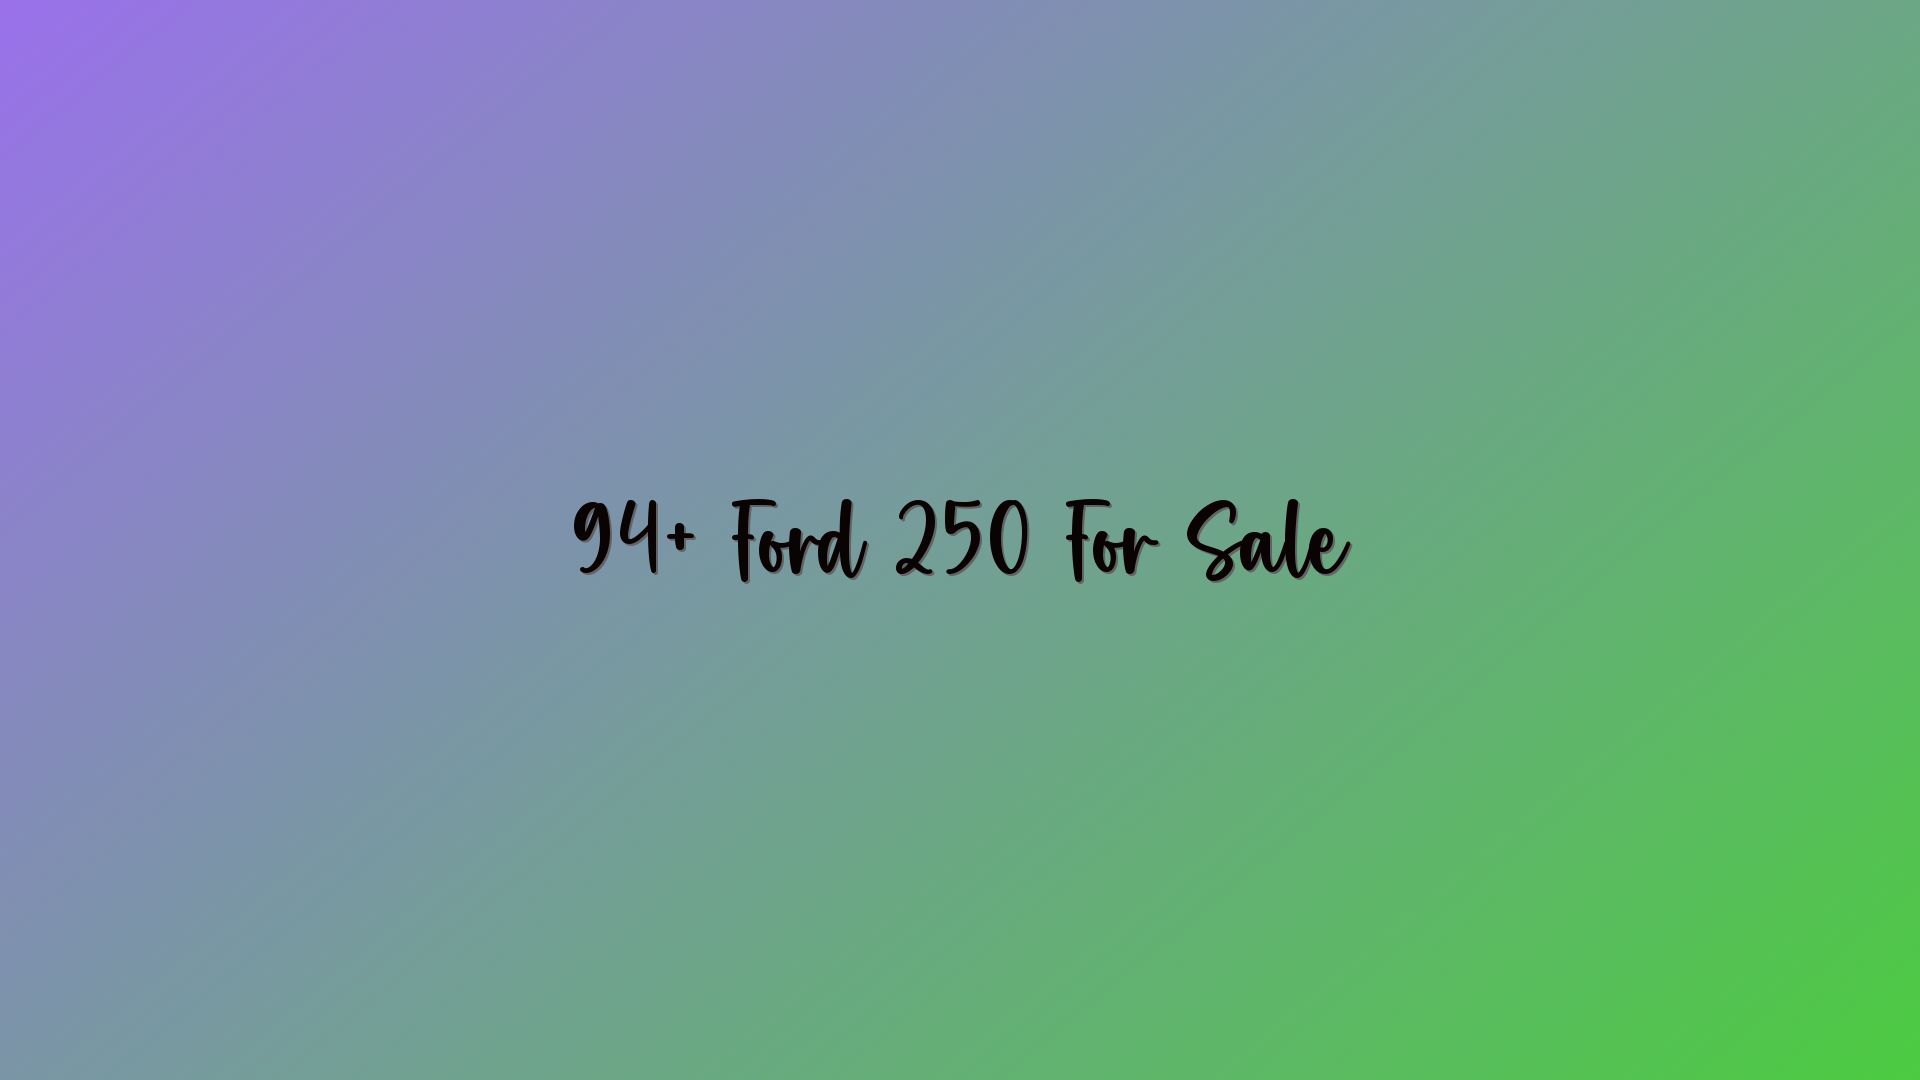 94+ Ford 250 For Sale